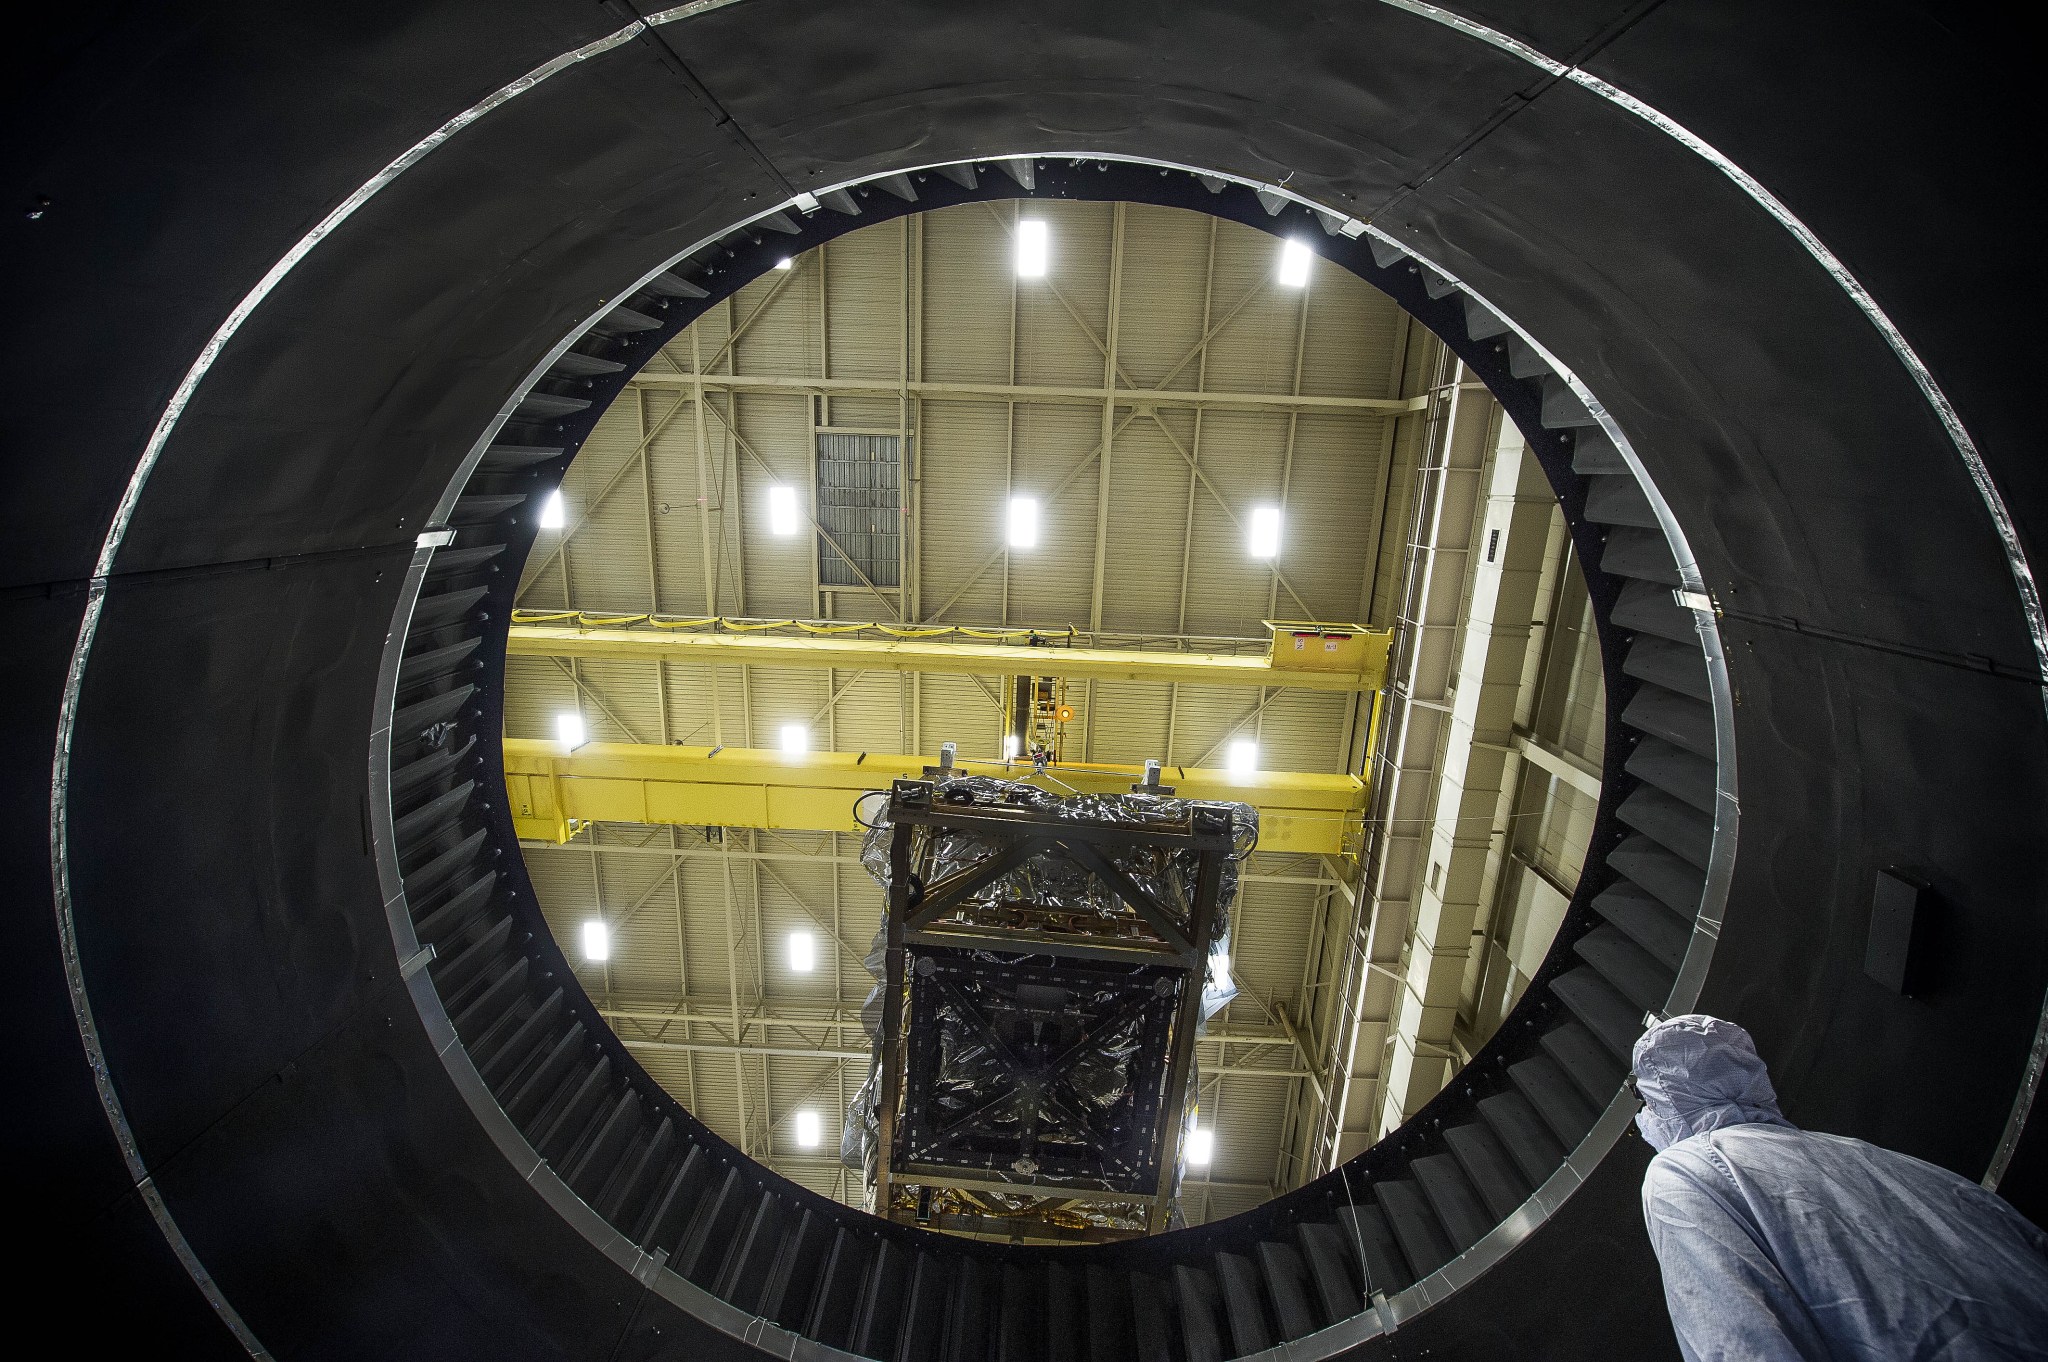 The view from inside NASA Goddard's Thermal Vacuum Chamber shows the JWST heart being lowered by crane in preparation of weeks of space environment testing.